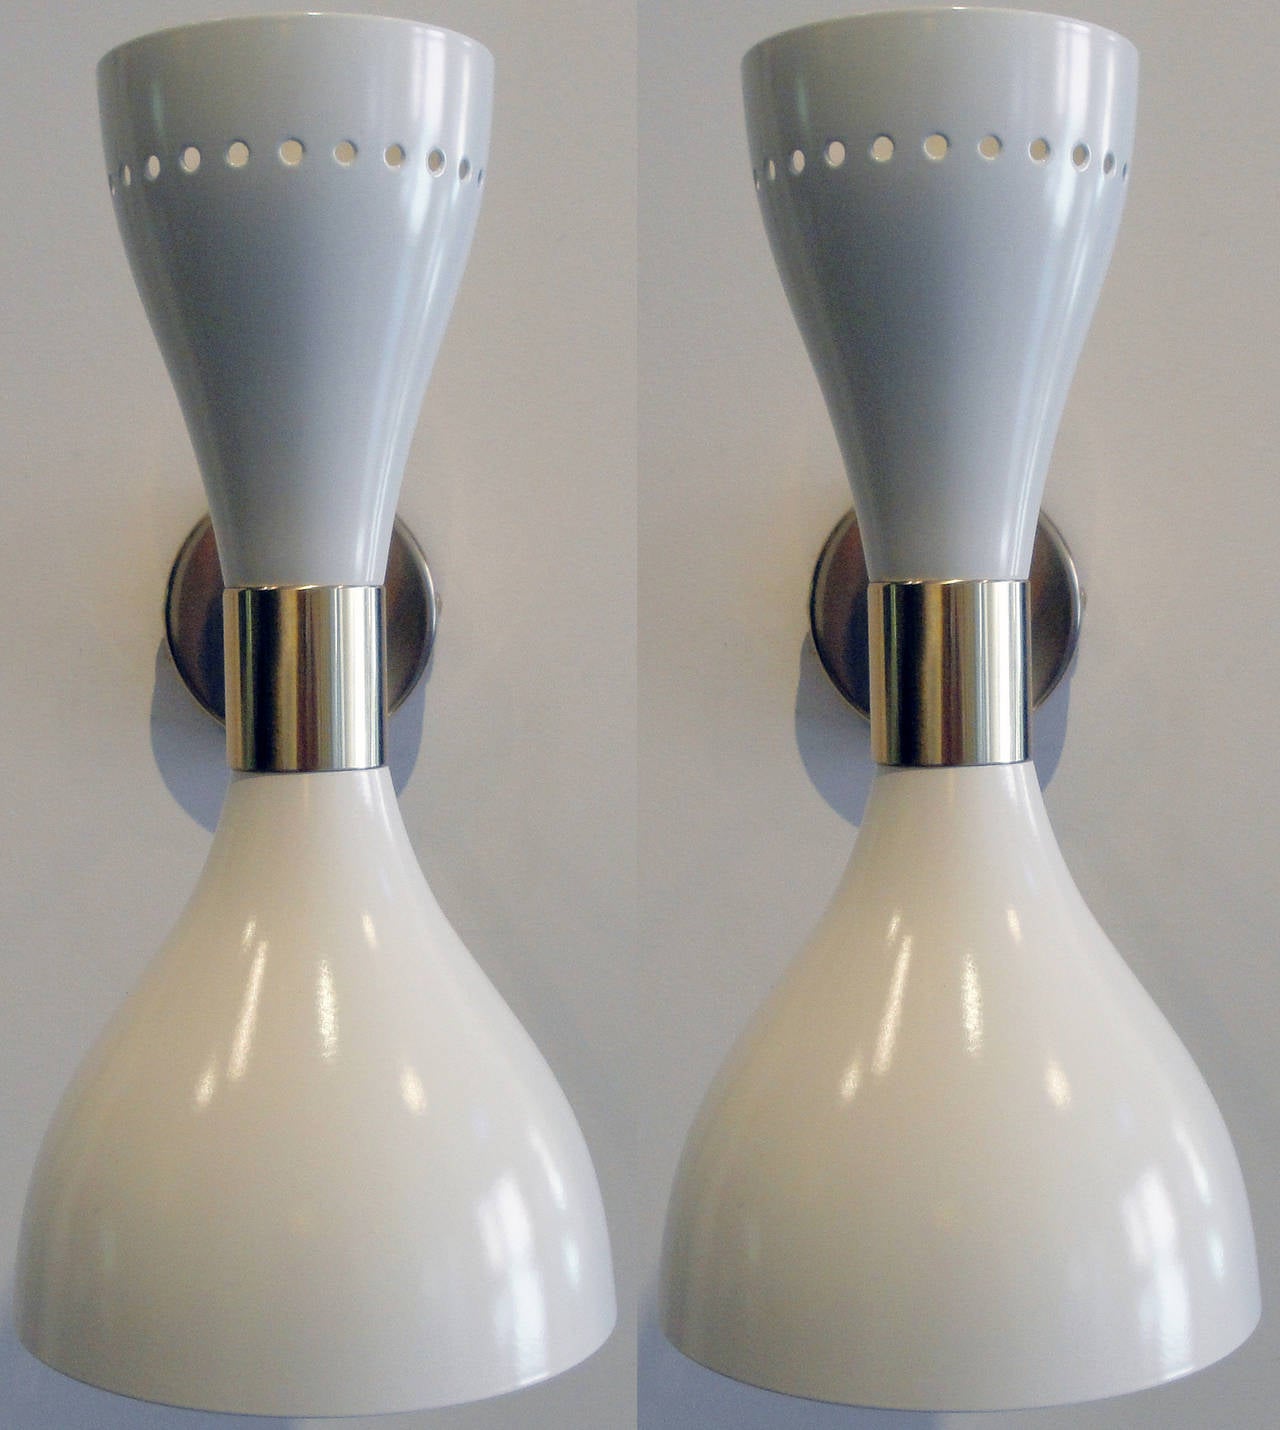 White enamel on aluminum with brass arms and fittings.
Sconces can be positioned at any angle. Each sconce takes two bulbs, one at the bottom, one at the top. Brass arms, fully restored shades.